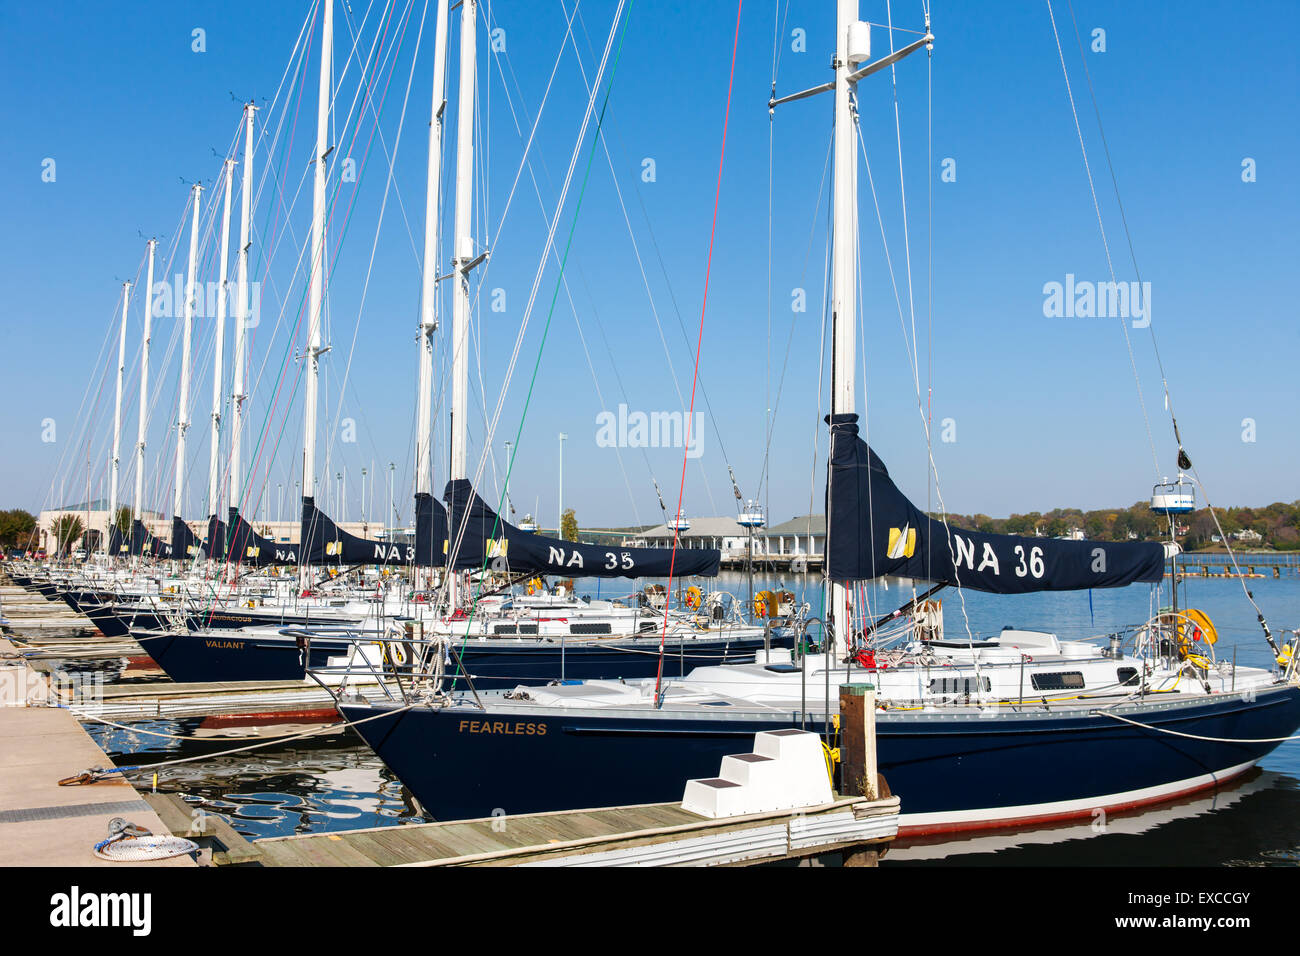 US Navy 44 Fuß Sail Training 935 (Navy 44 s) in Santee Basin an der US Naval Academy in Annapolis, Maryland, angedockt. Stockfoto